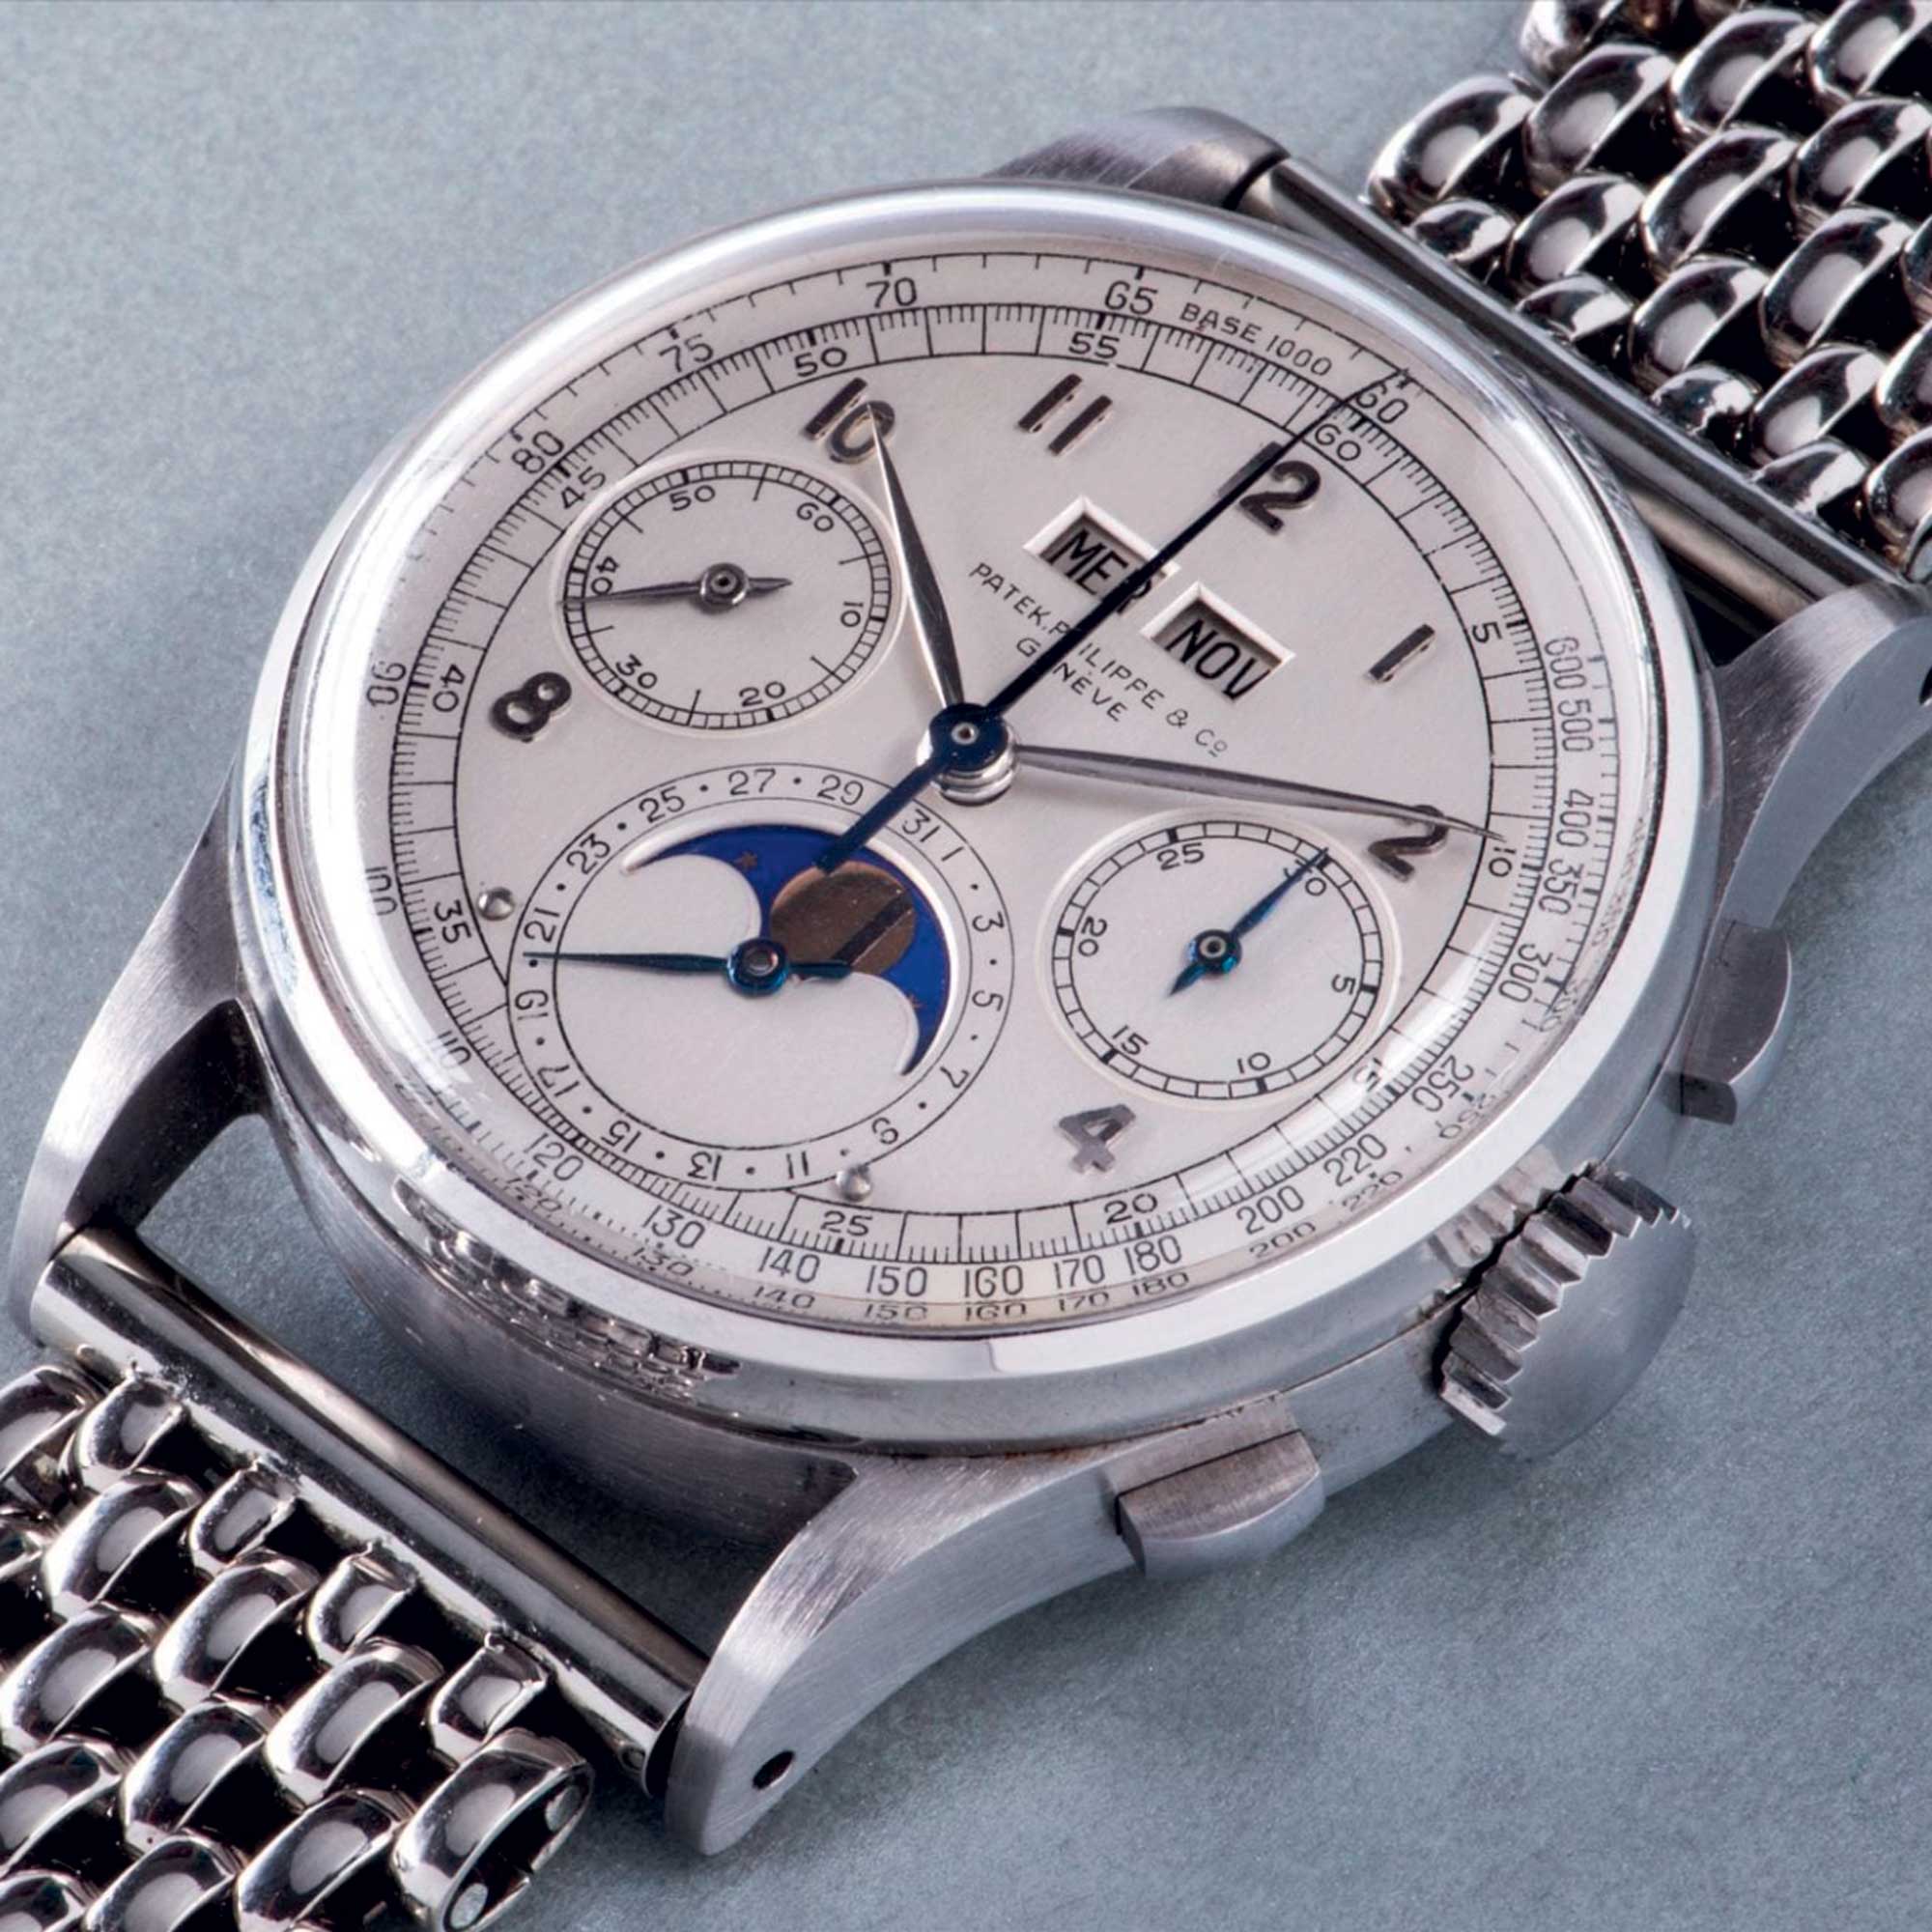 The brand’s first perpetual calendar chronograph, Ref. 1518 (Image: Phillips)